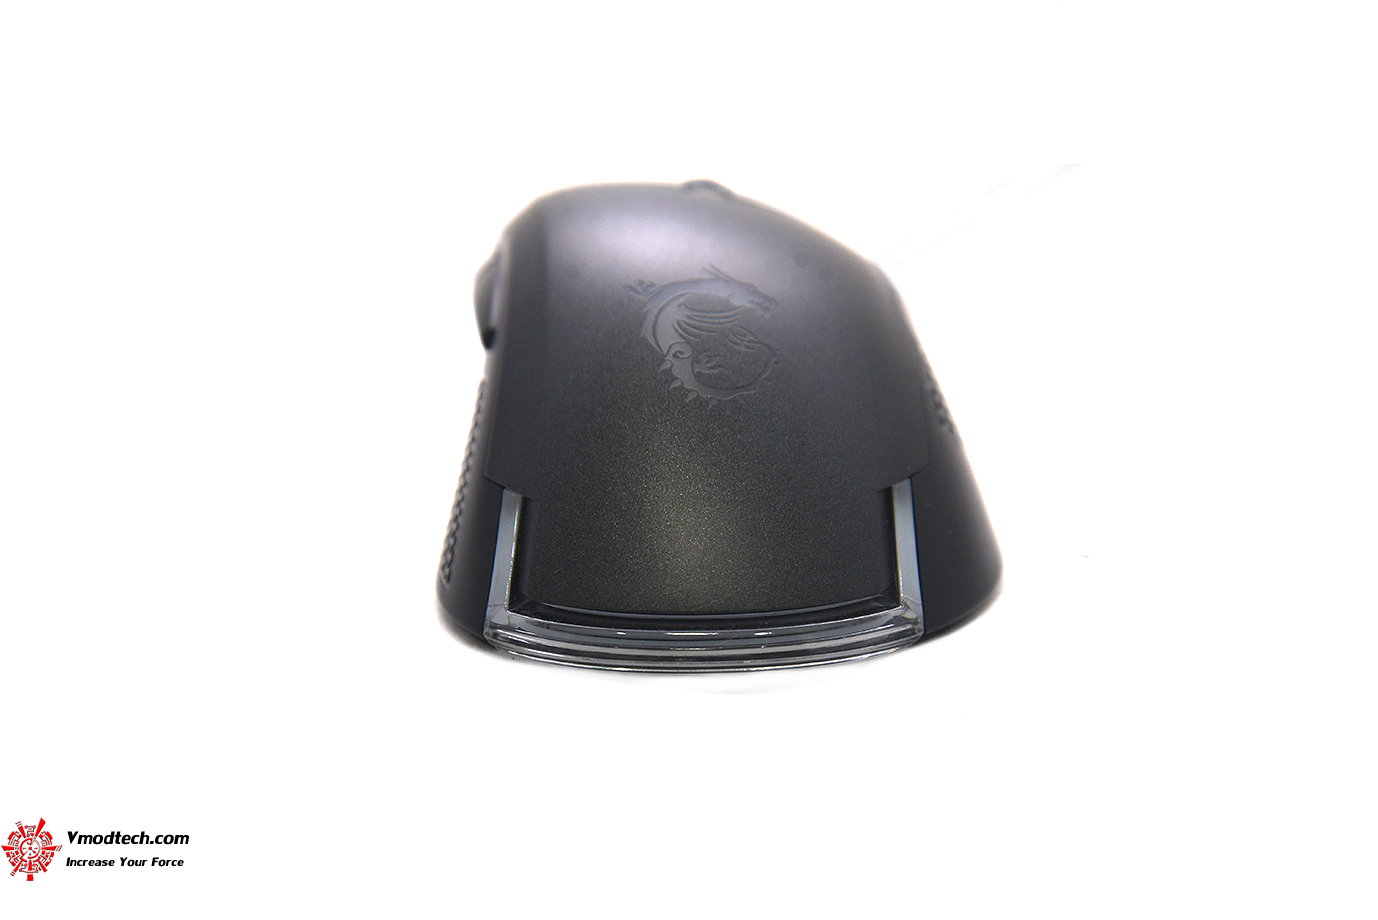 dsc 4916 MSI CLUTCH GM50 GAMING MOUSE REVIEW